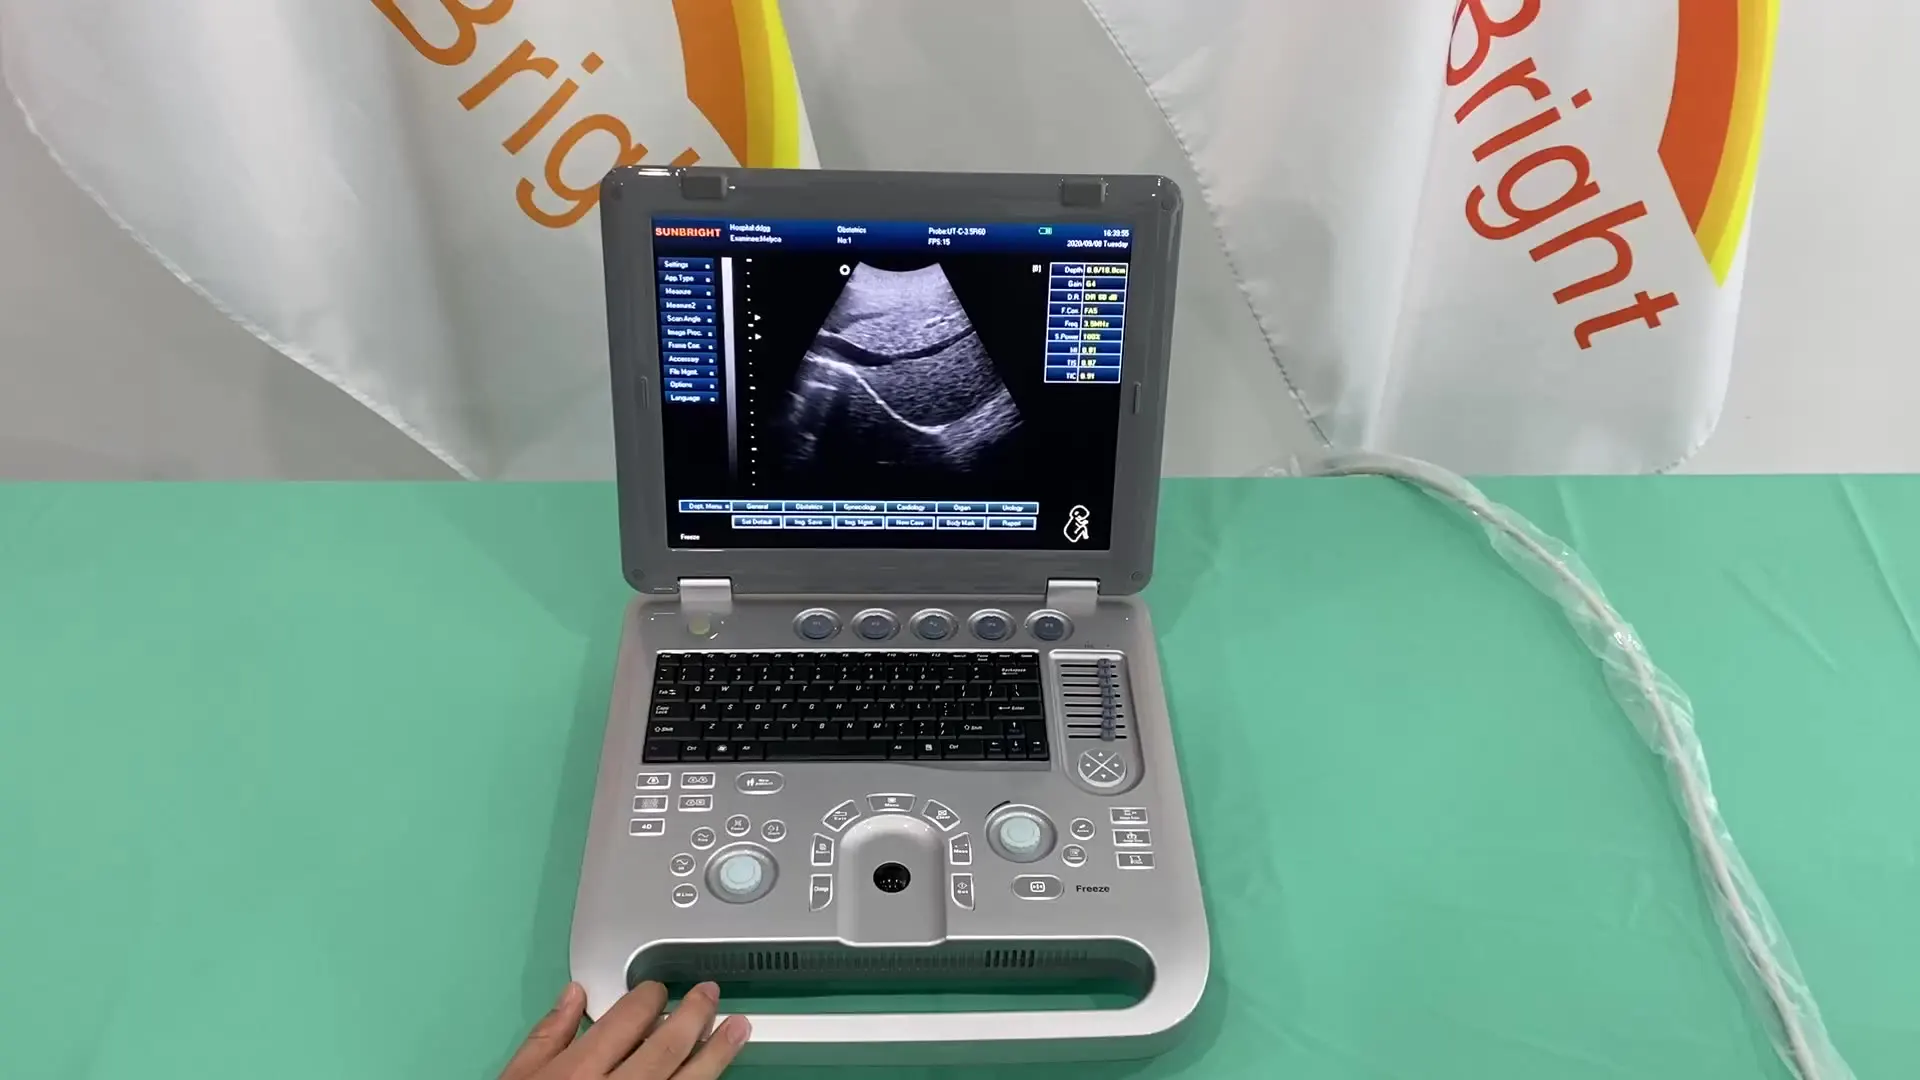 Sunbright clinic diagnostic ultrasound with convex linear probe